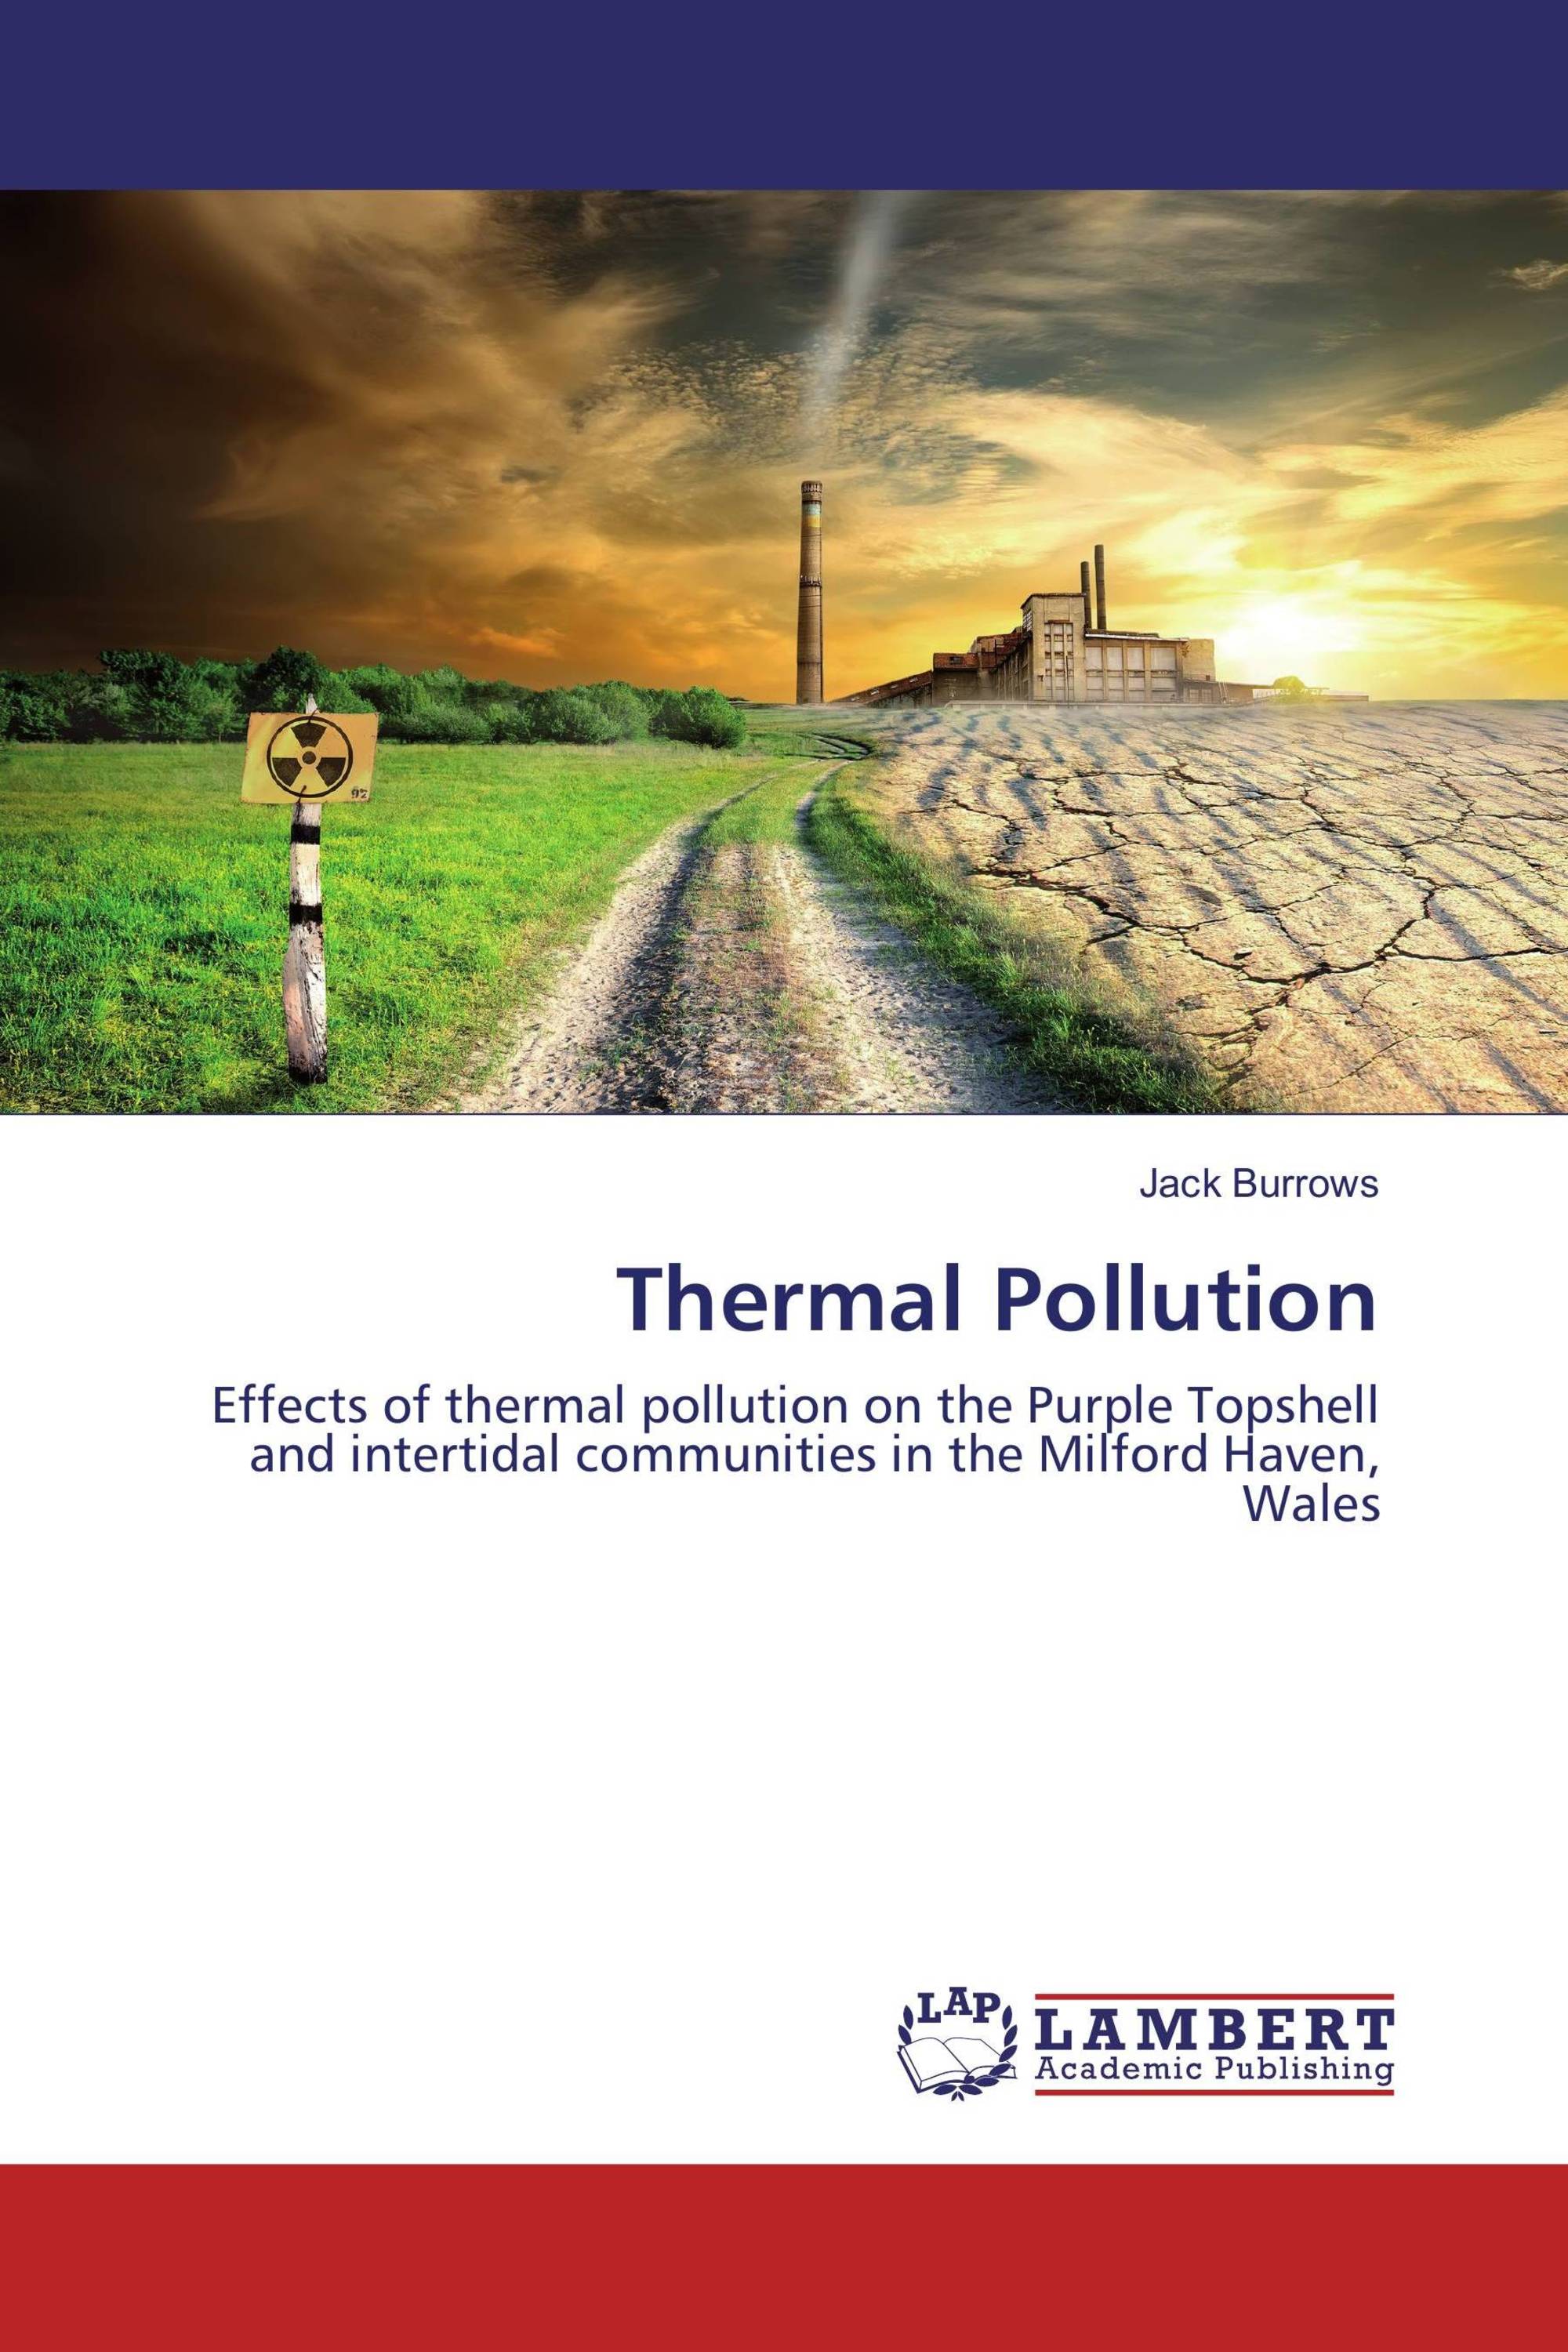 effects of thermal pollution